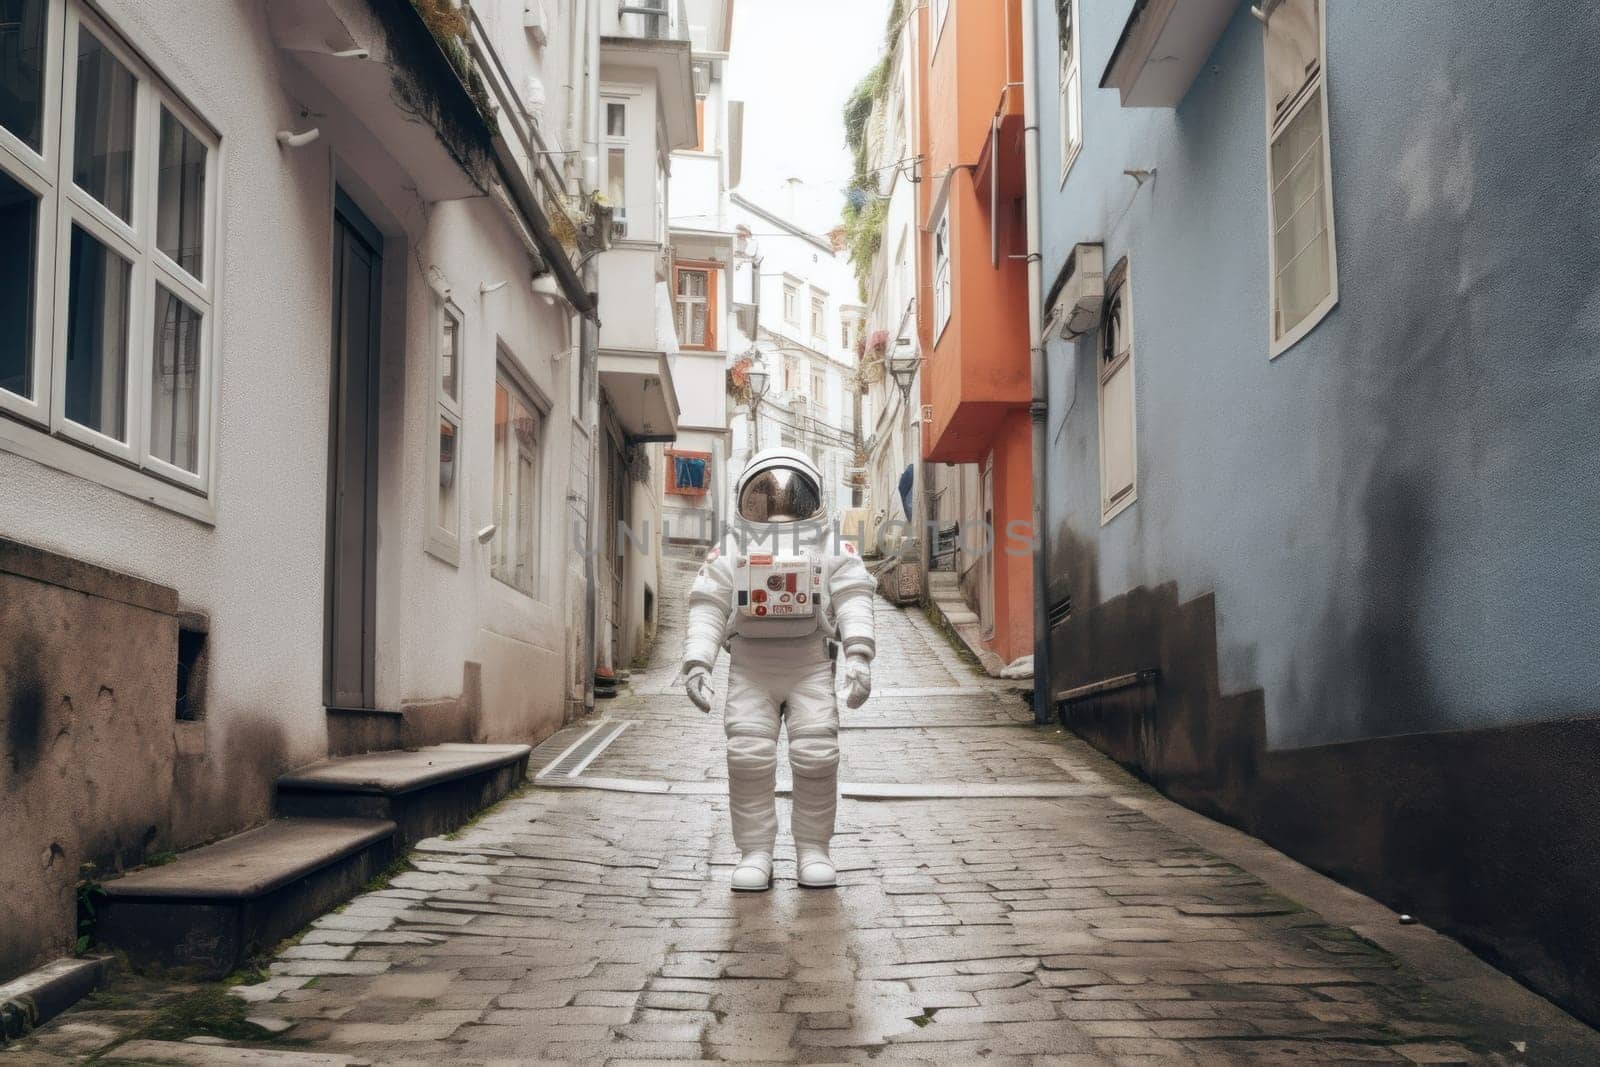 Photo of Astronaut in the urban environment by nijieimu